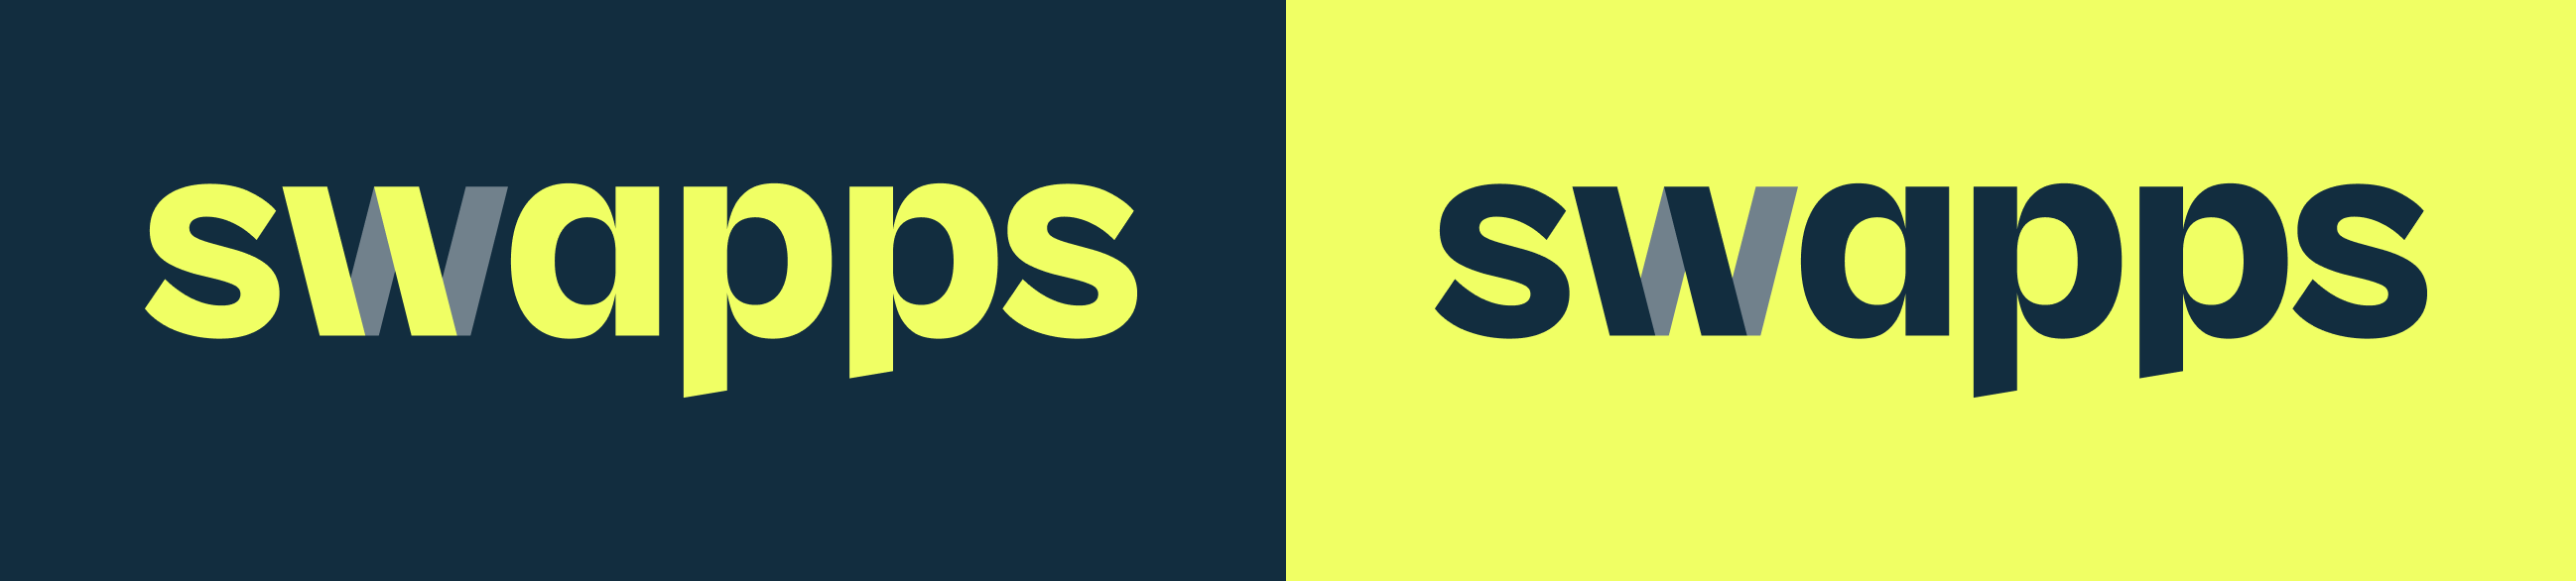 Swapps logo. 2 versions.